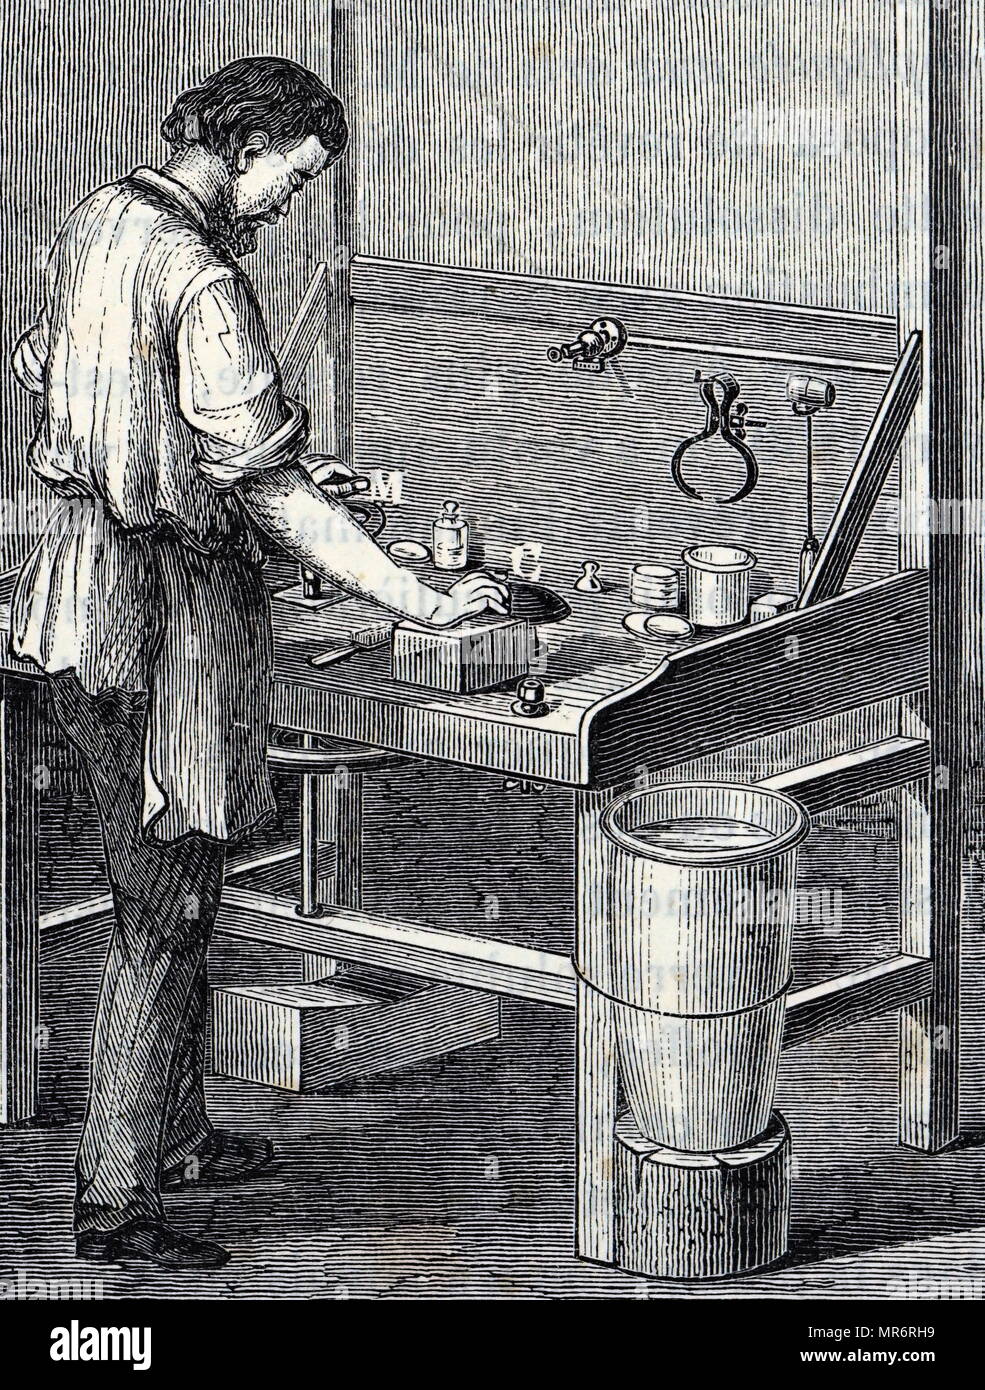 Engraving depicting a man grinding spectacle lenses. Dated 19th century Stock Photo